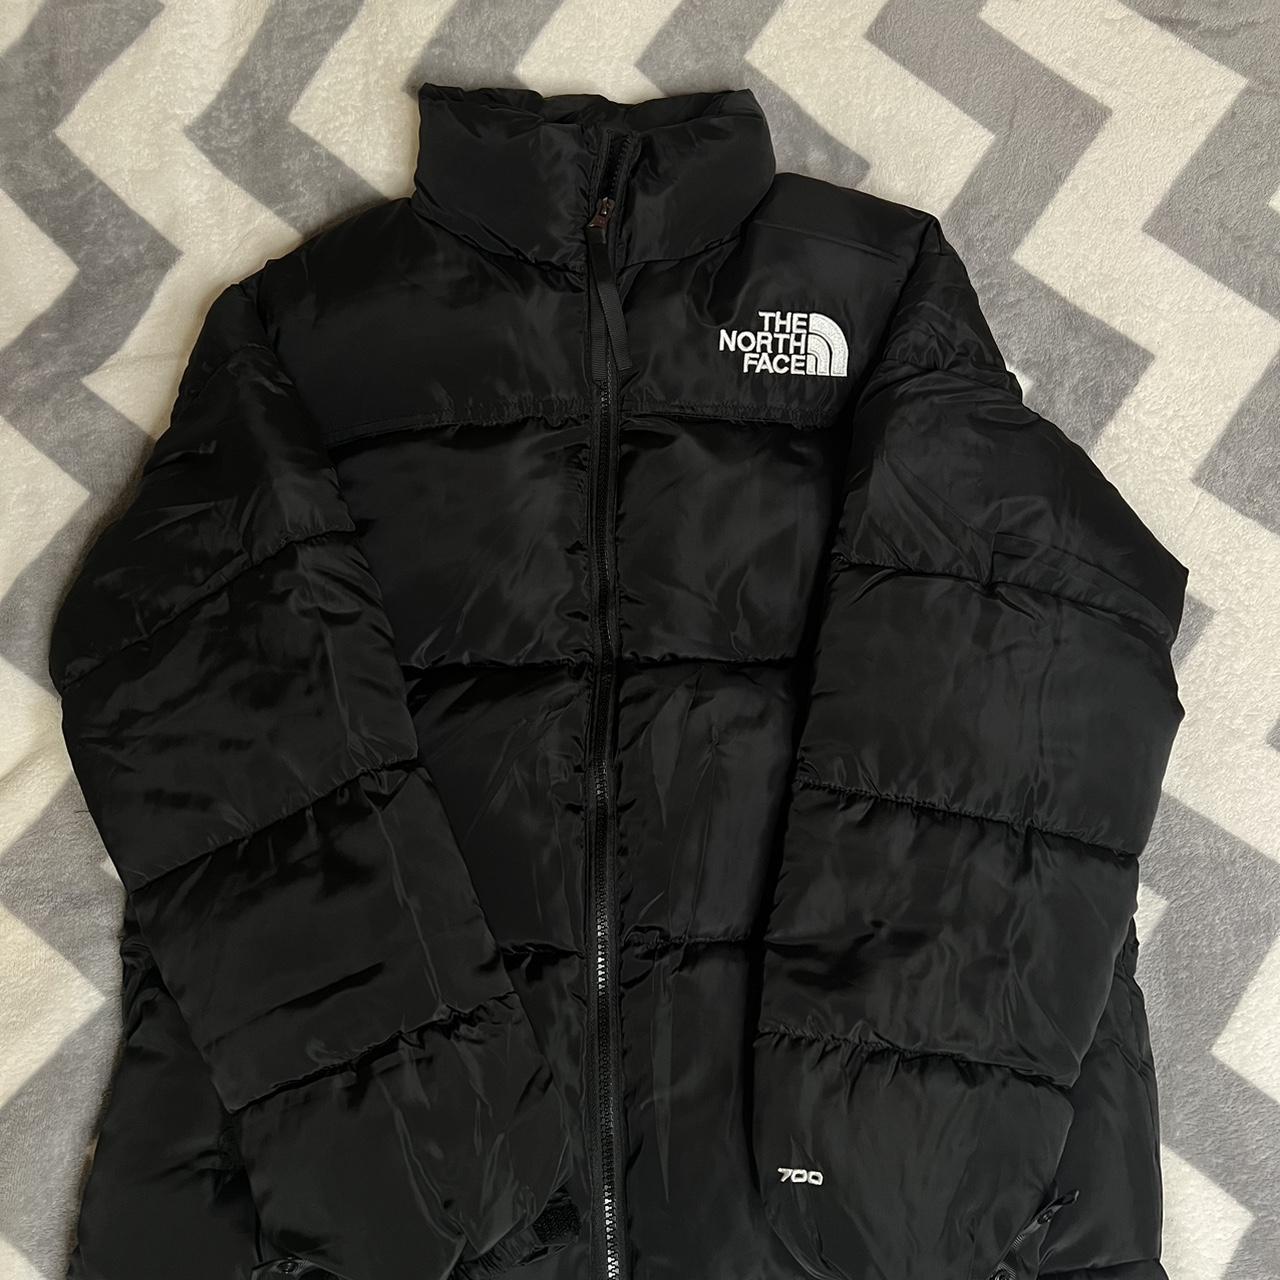 North Face Puffer 1996 - 700 Size M Any questions... - Depop